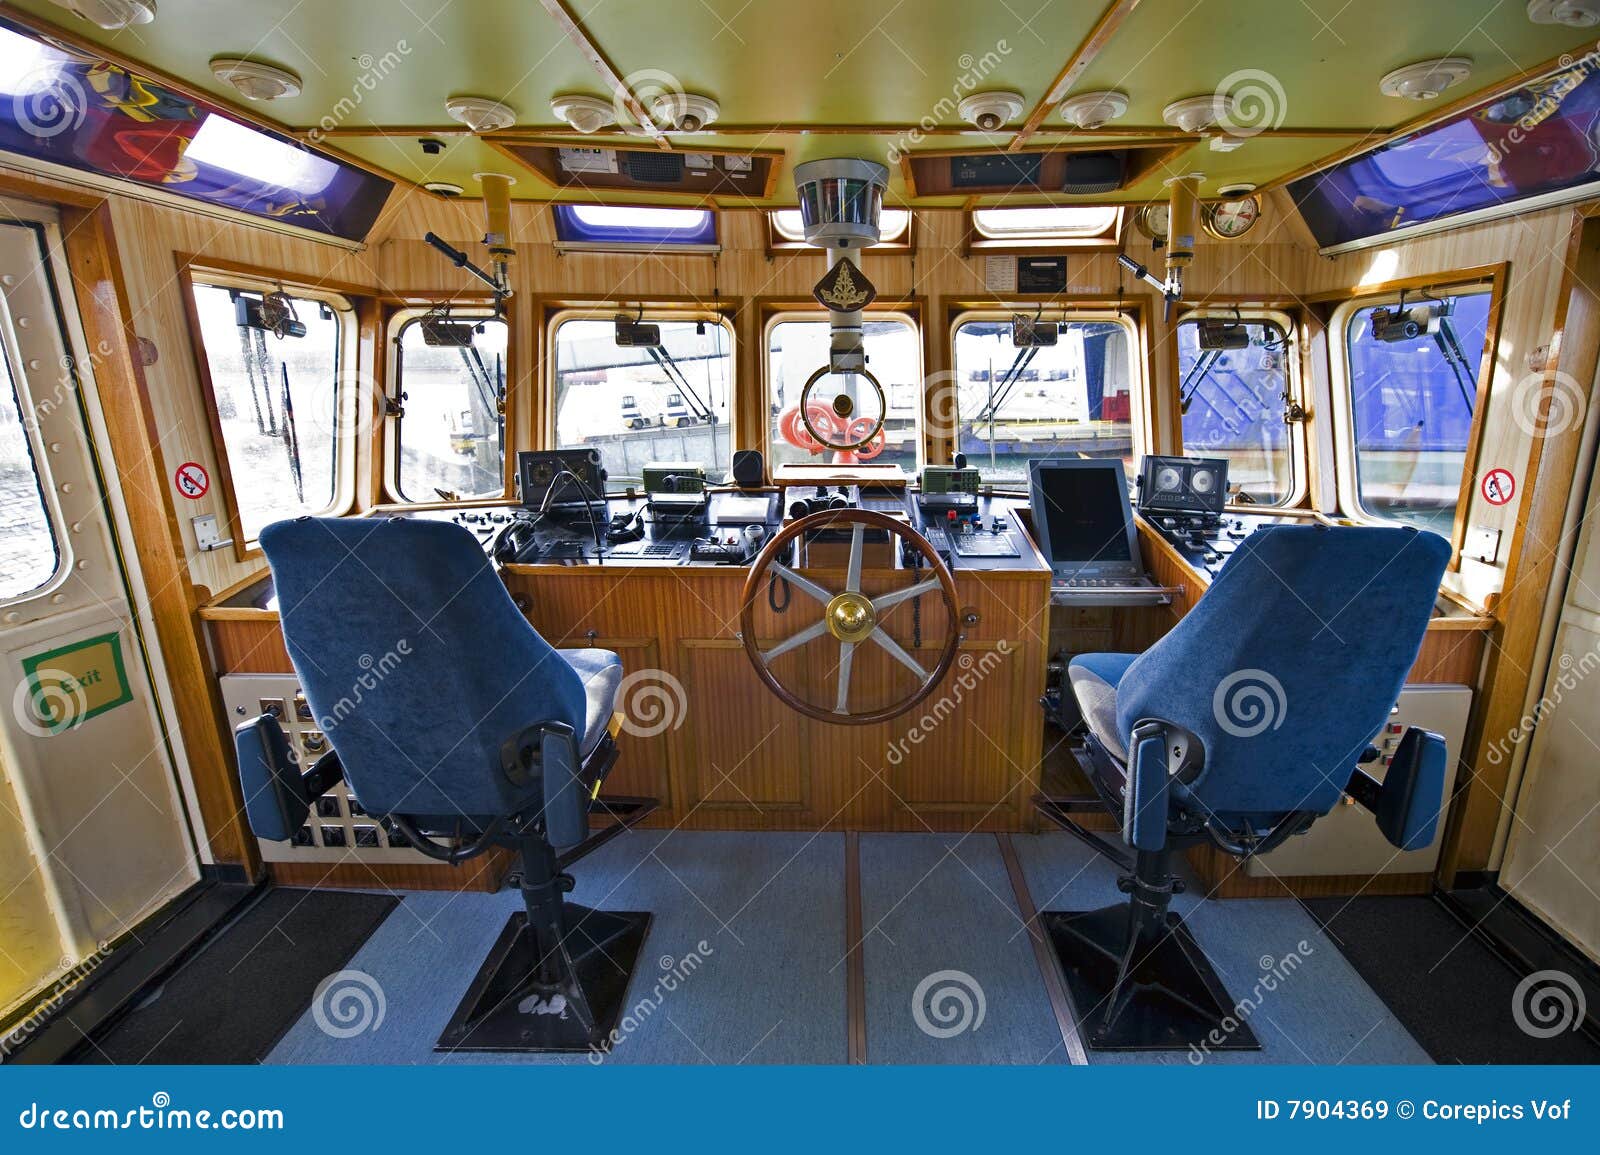 The Wheelhouse Of A Fire Boat Stock Image - Image of ...